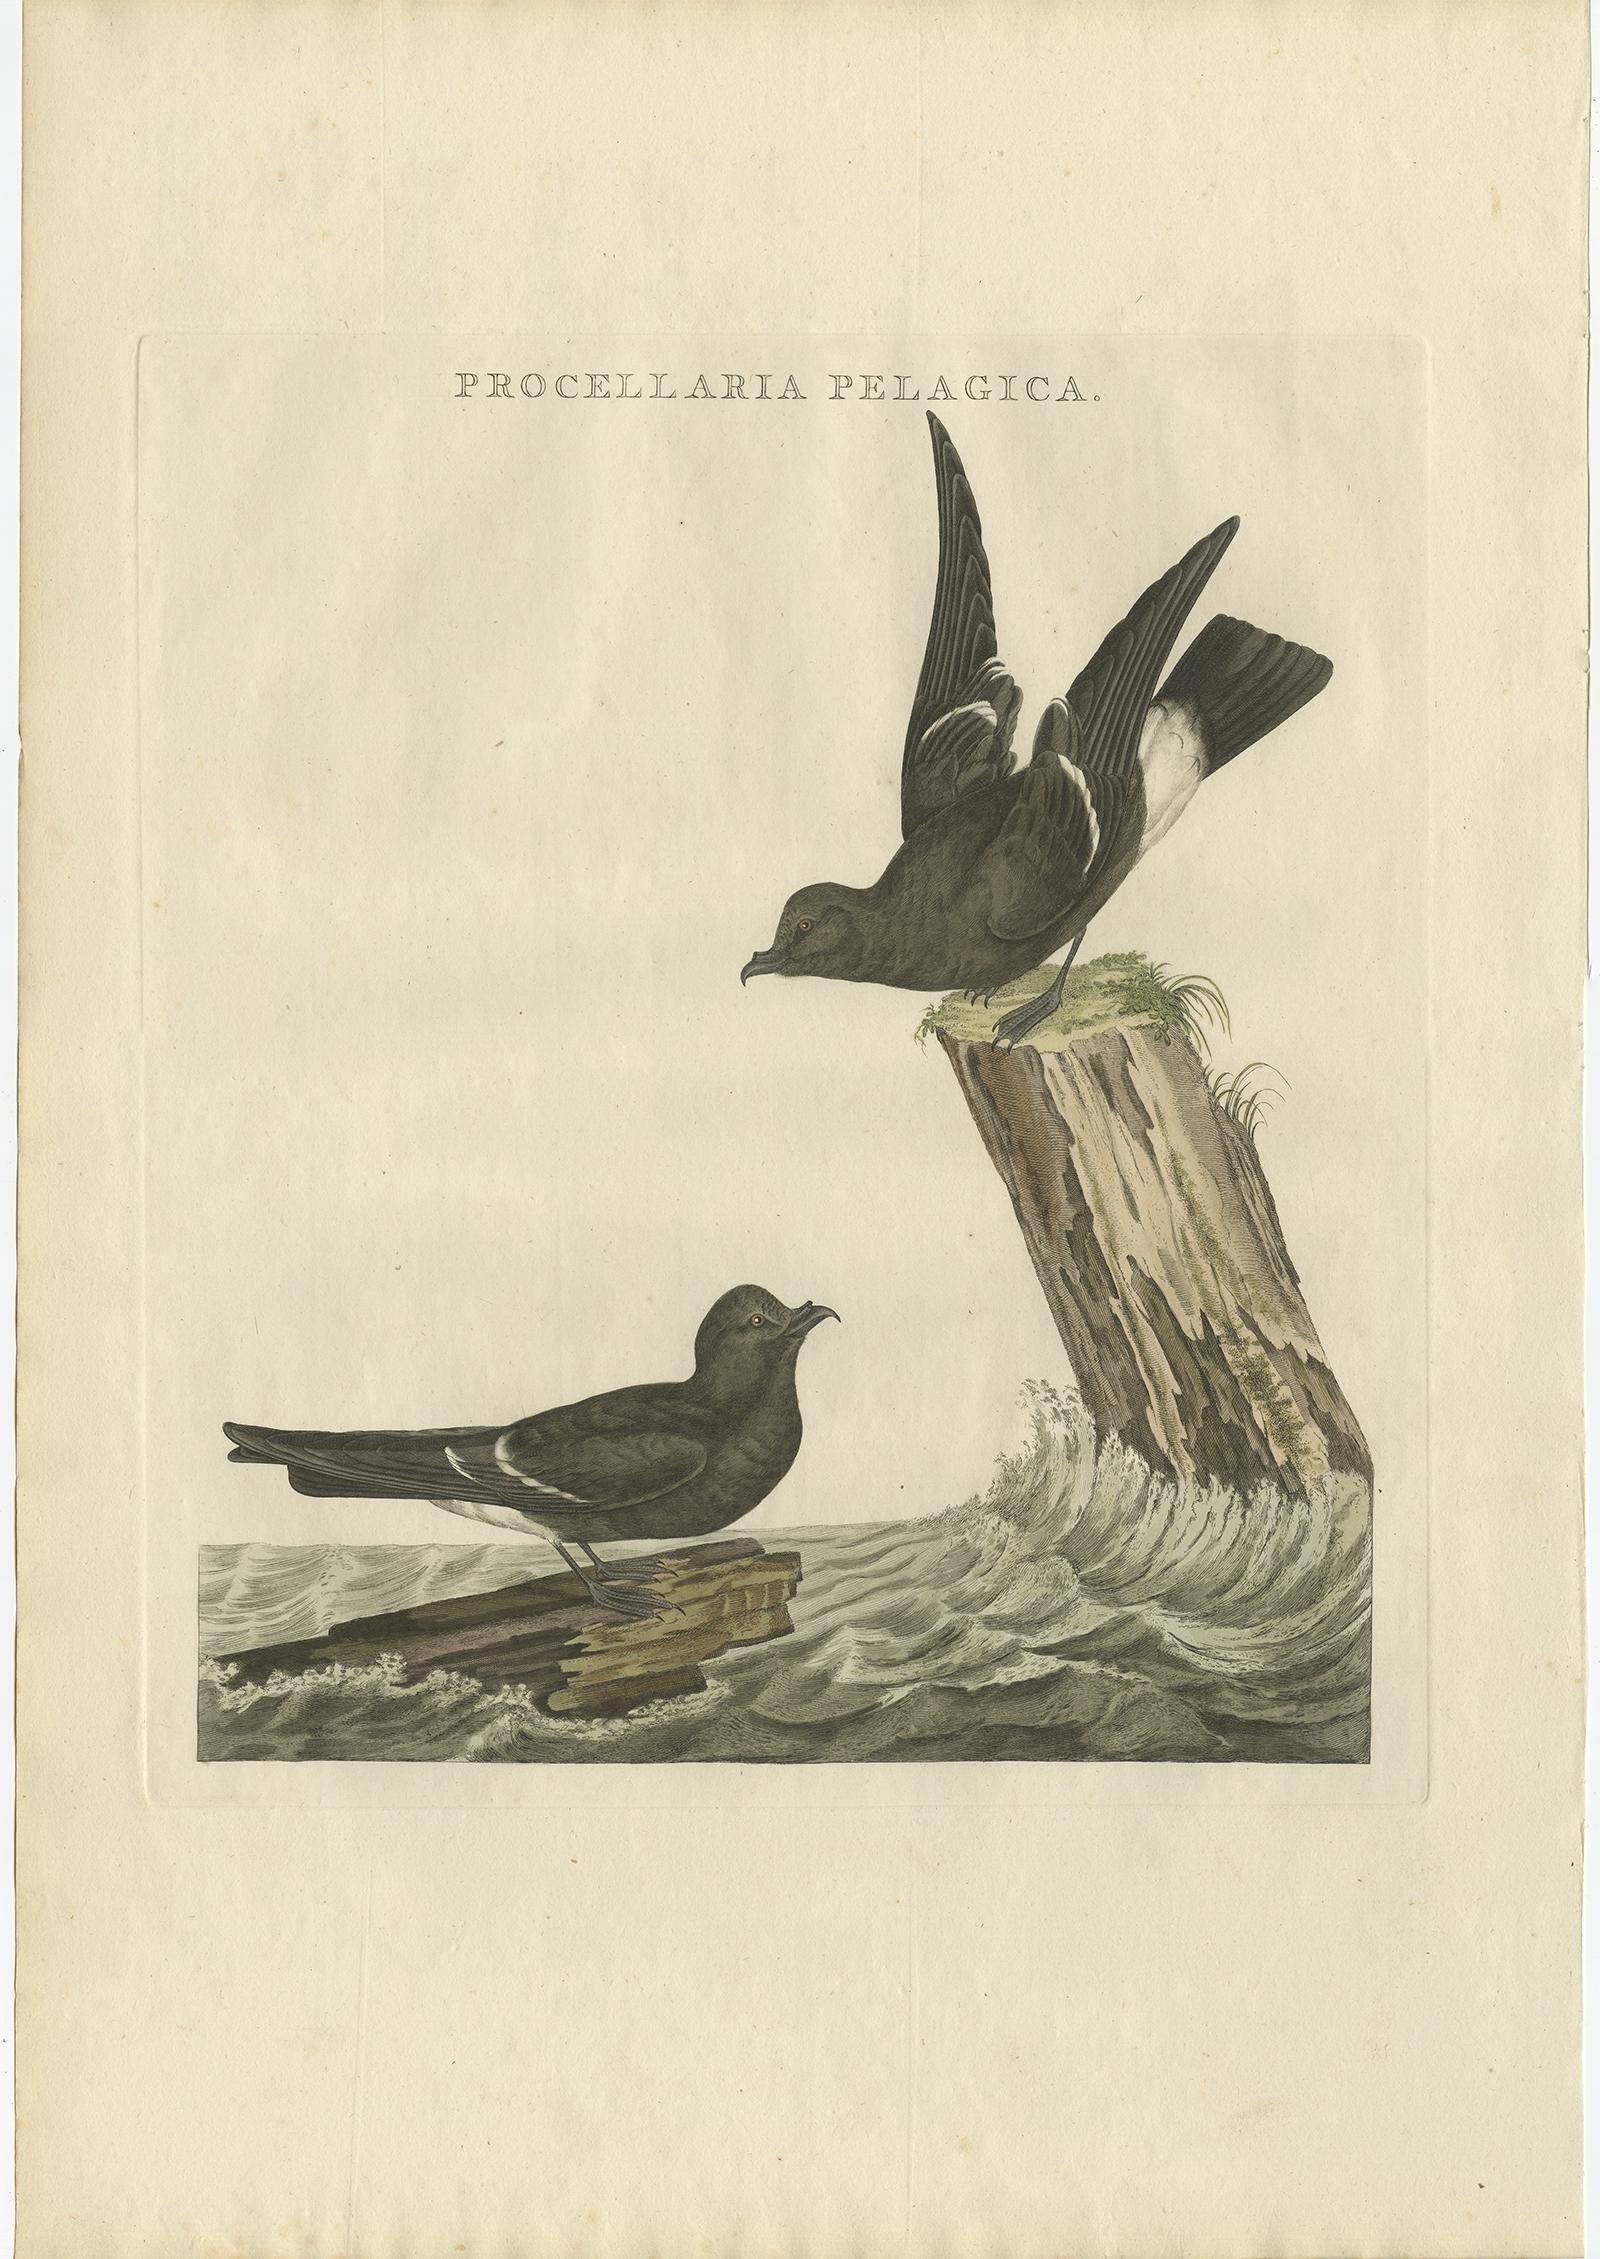 Antique print titled ‘Procellaria Pelagica'. 

This print depicts the European Storm Petrel (Dutch: Stormzaluw). The European storm petrel, British storm petrel or just storm petrel (Hydrobates pelagicus) is a seabird in the northern storm petrel